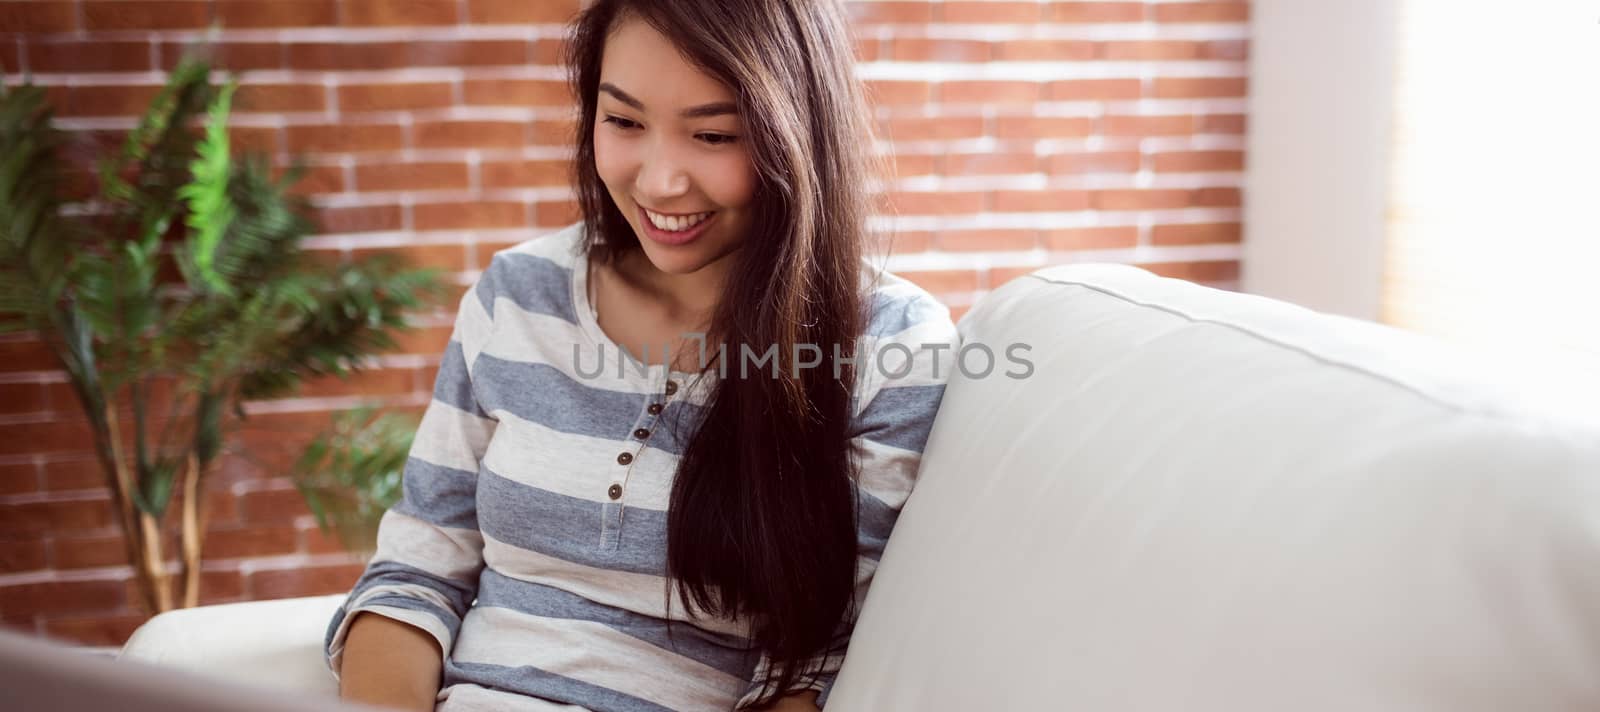 Smiling asian woman using laptop on couch at home in the living room